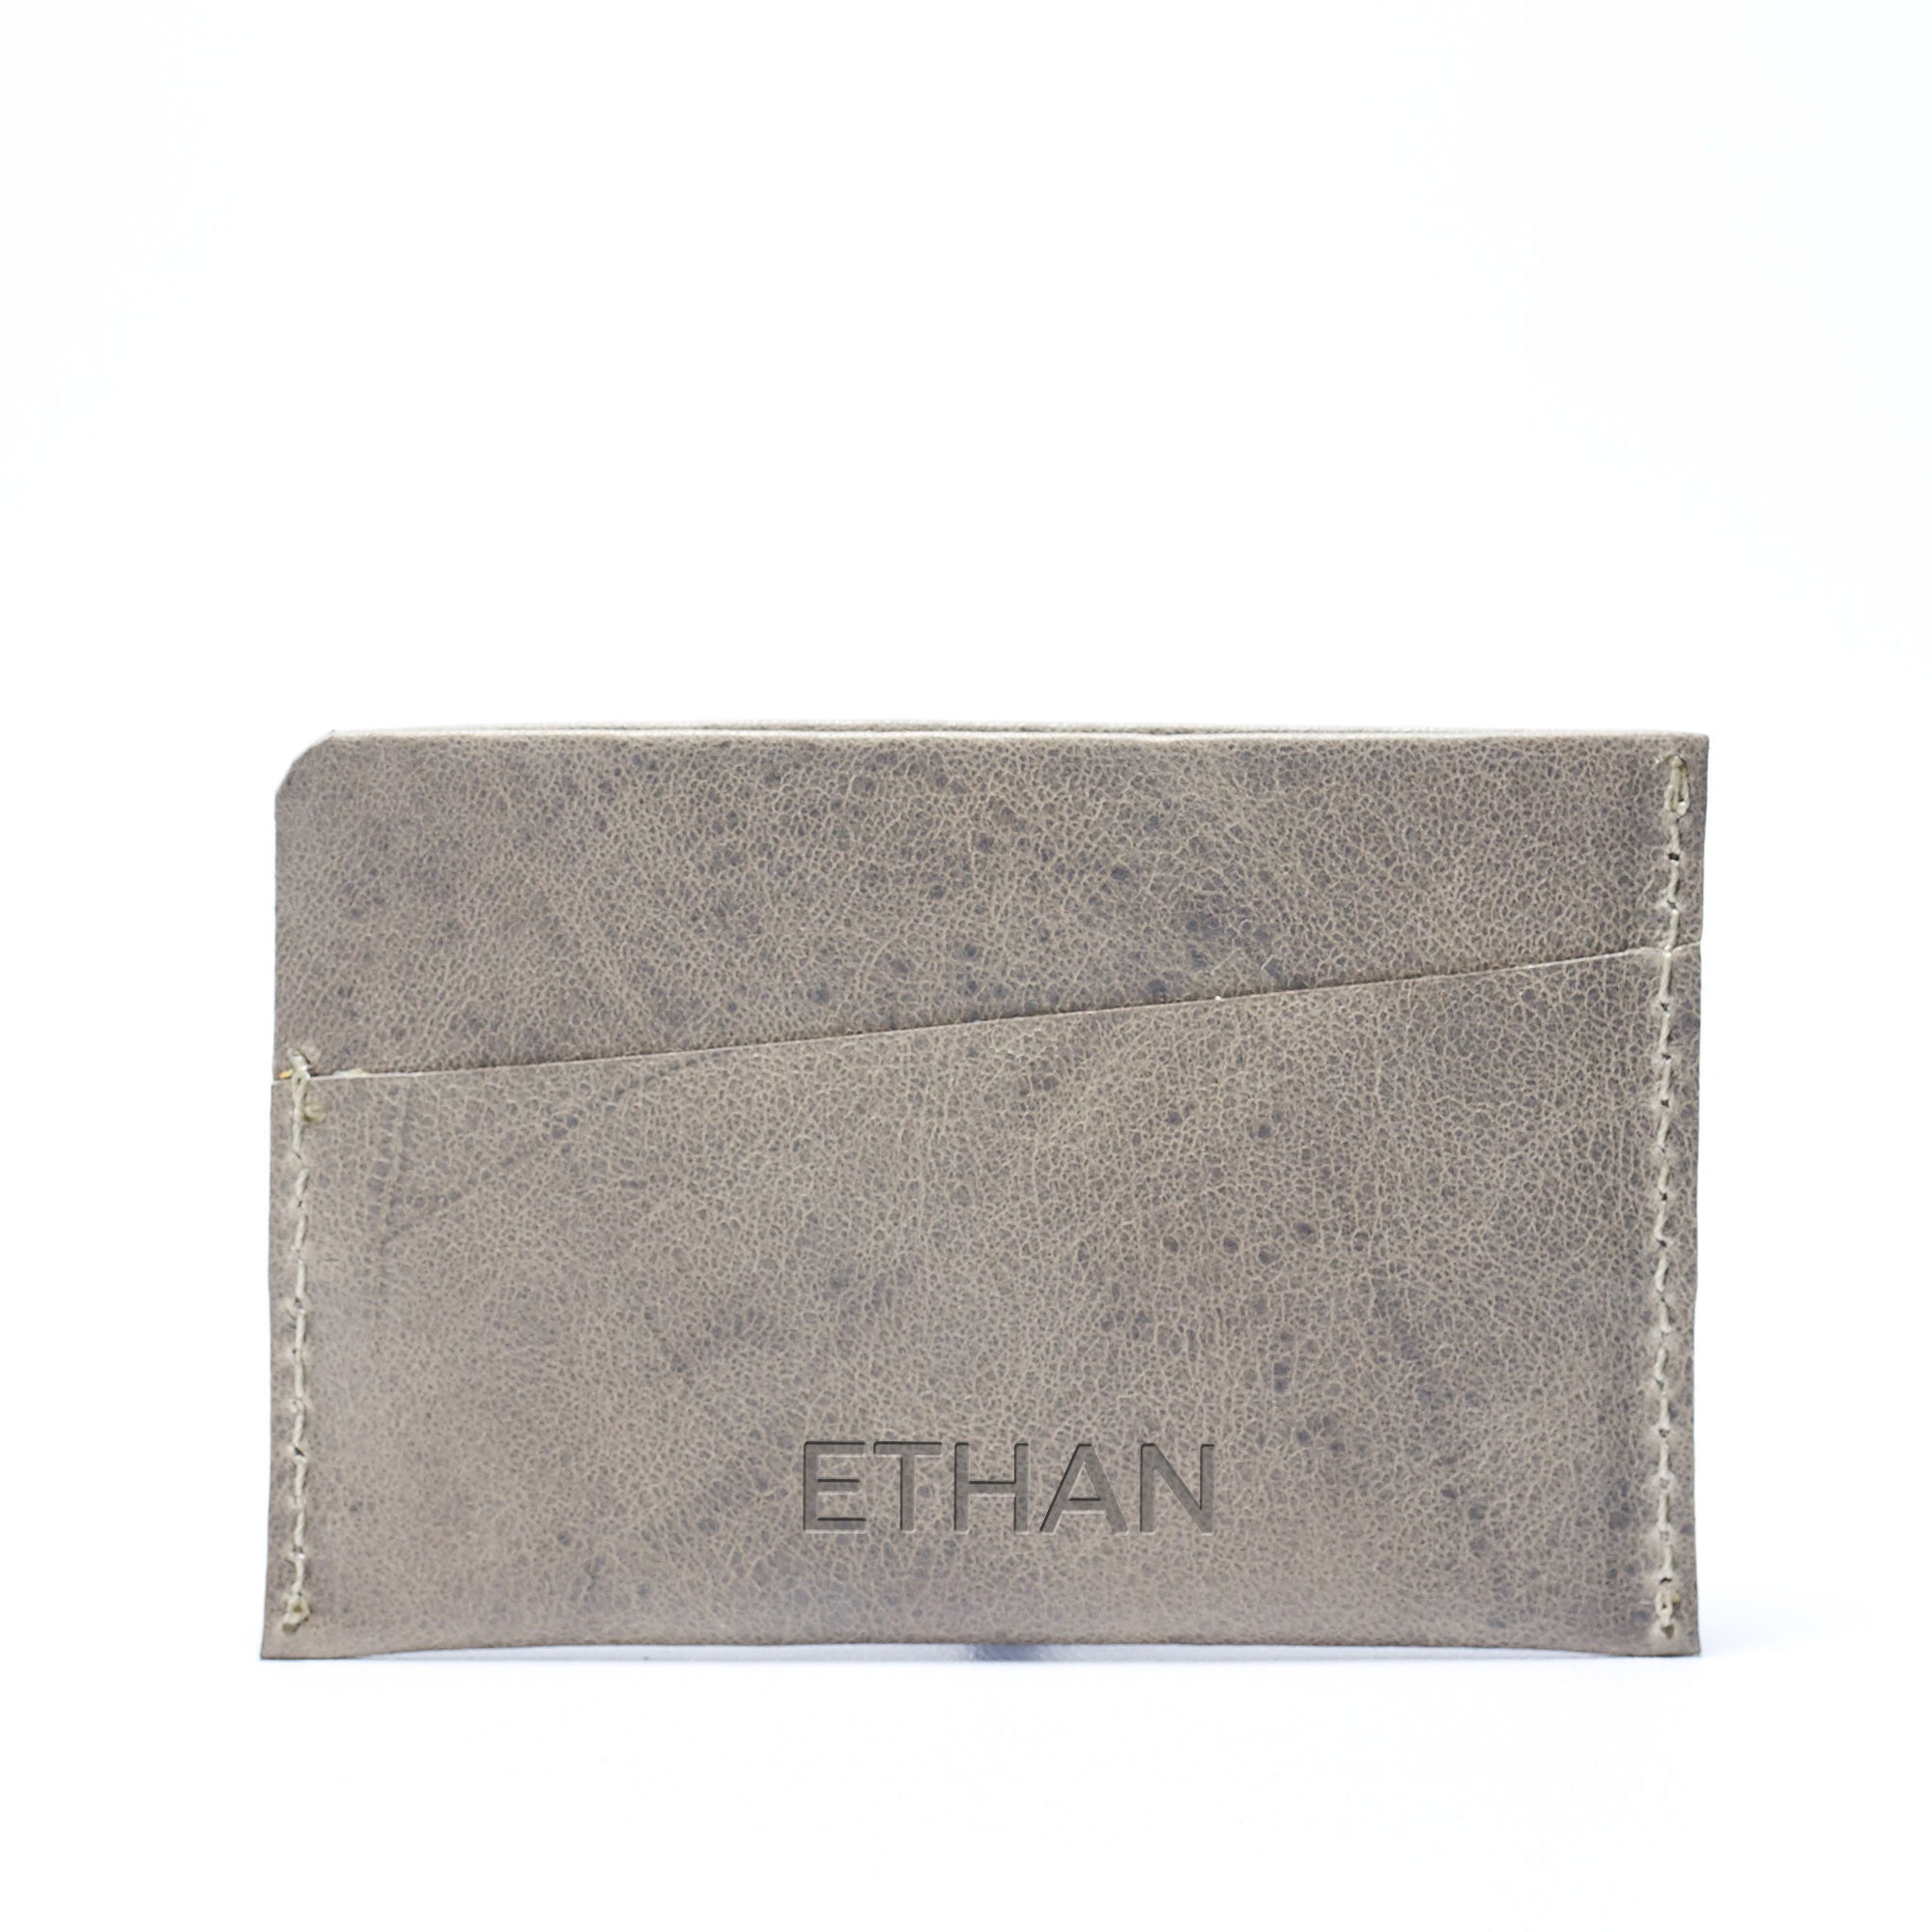 Leather grey card holder gifts for men handmade accessories by Capra Leather